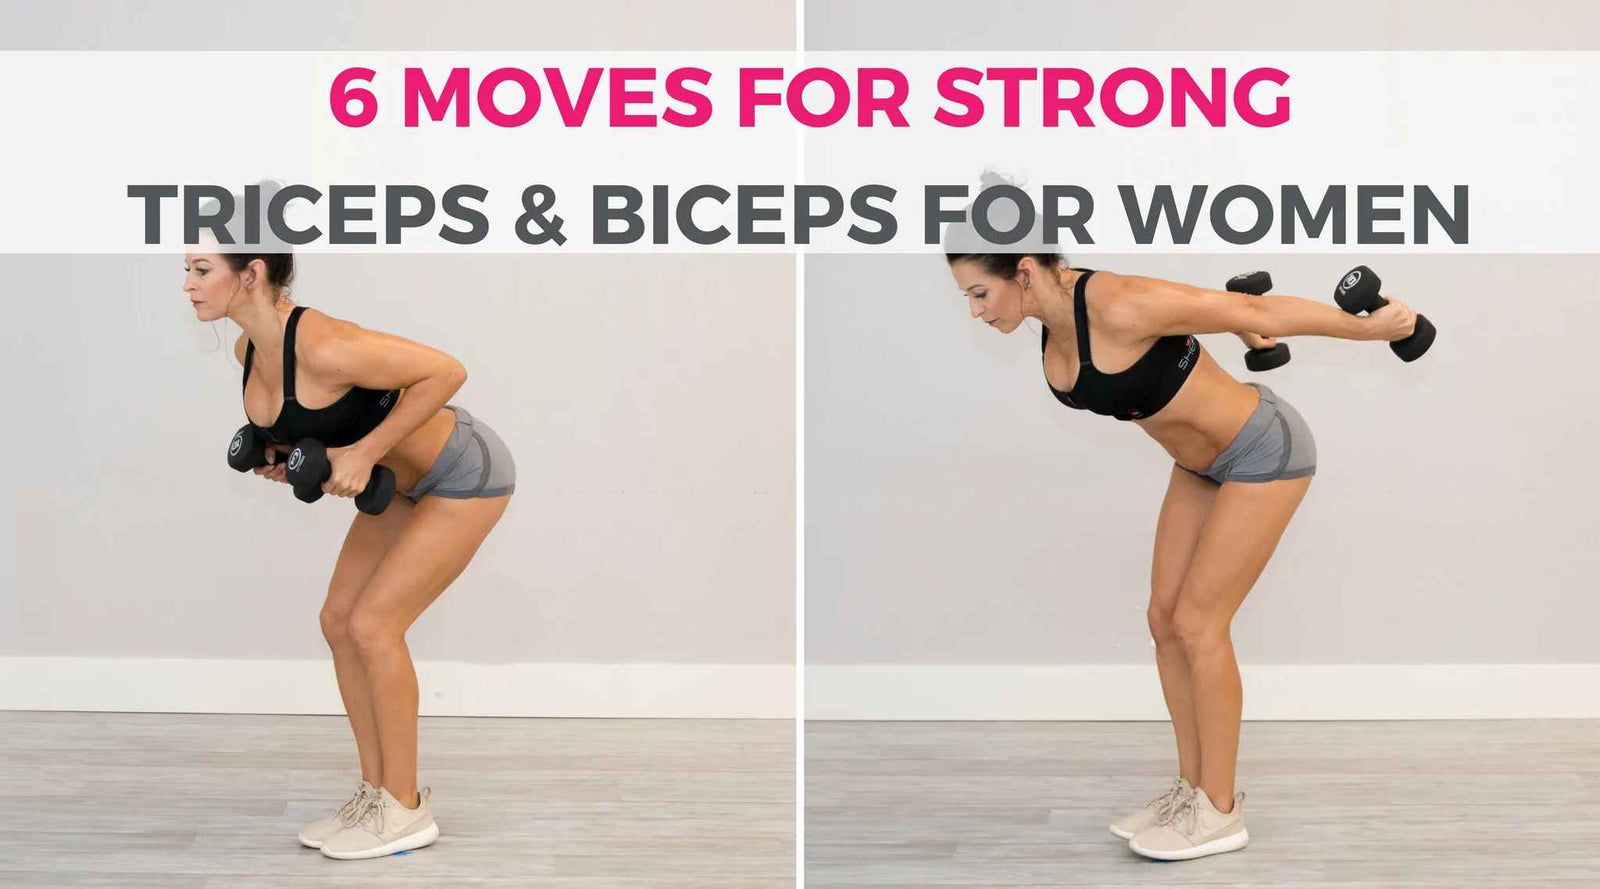 8 Awesome Exercises for Back Workouts at Home - SHEFIT